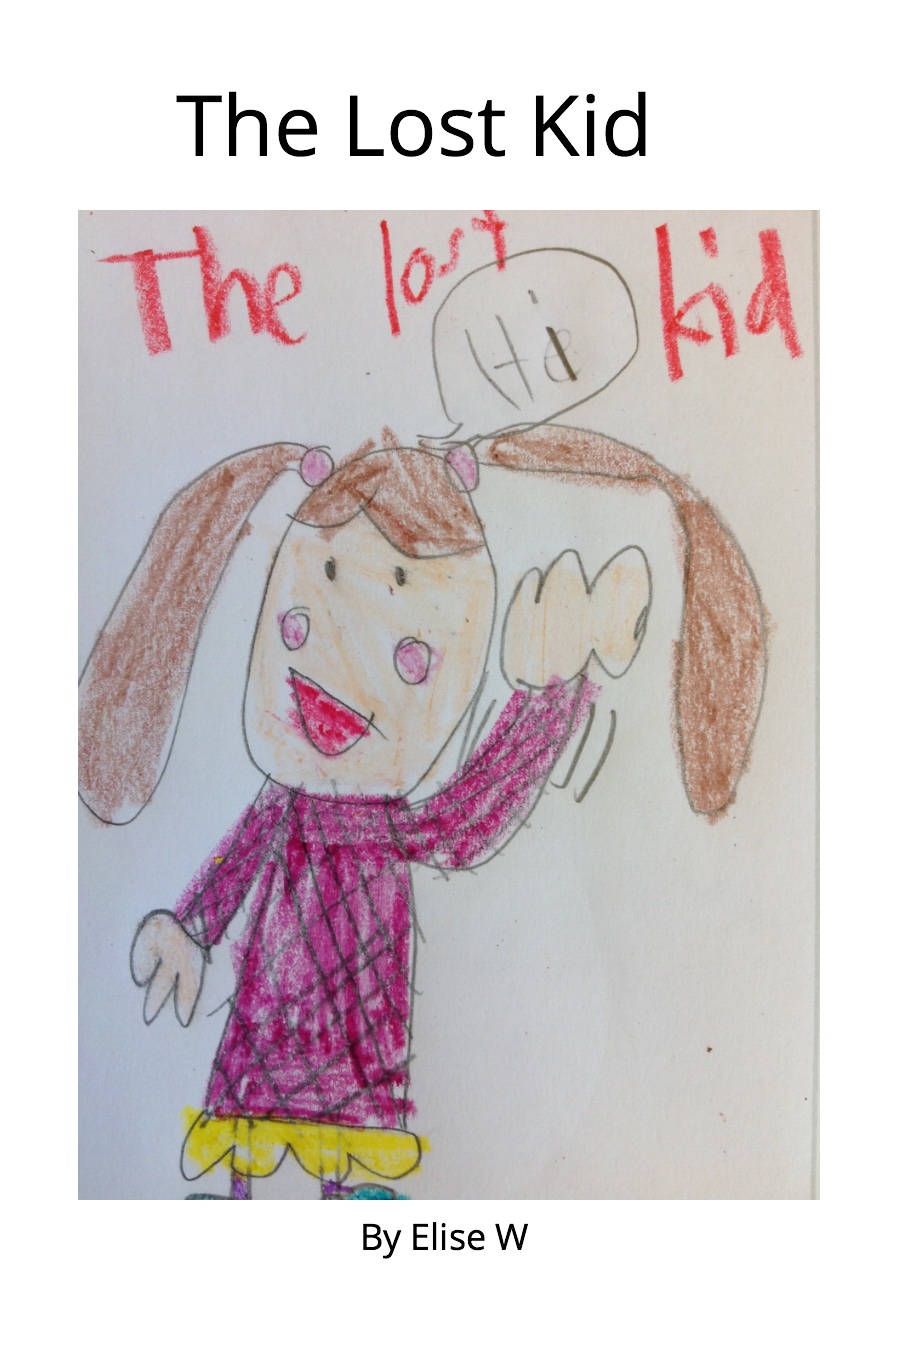 The Lost Kid by Elise W